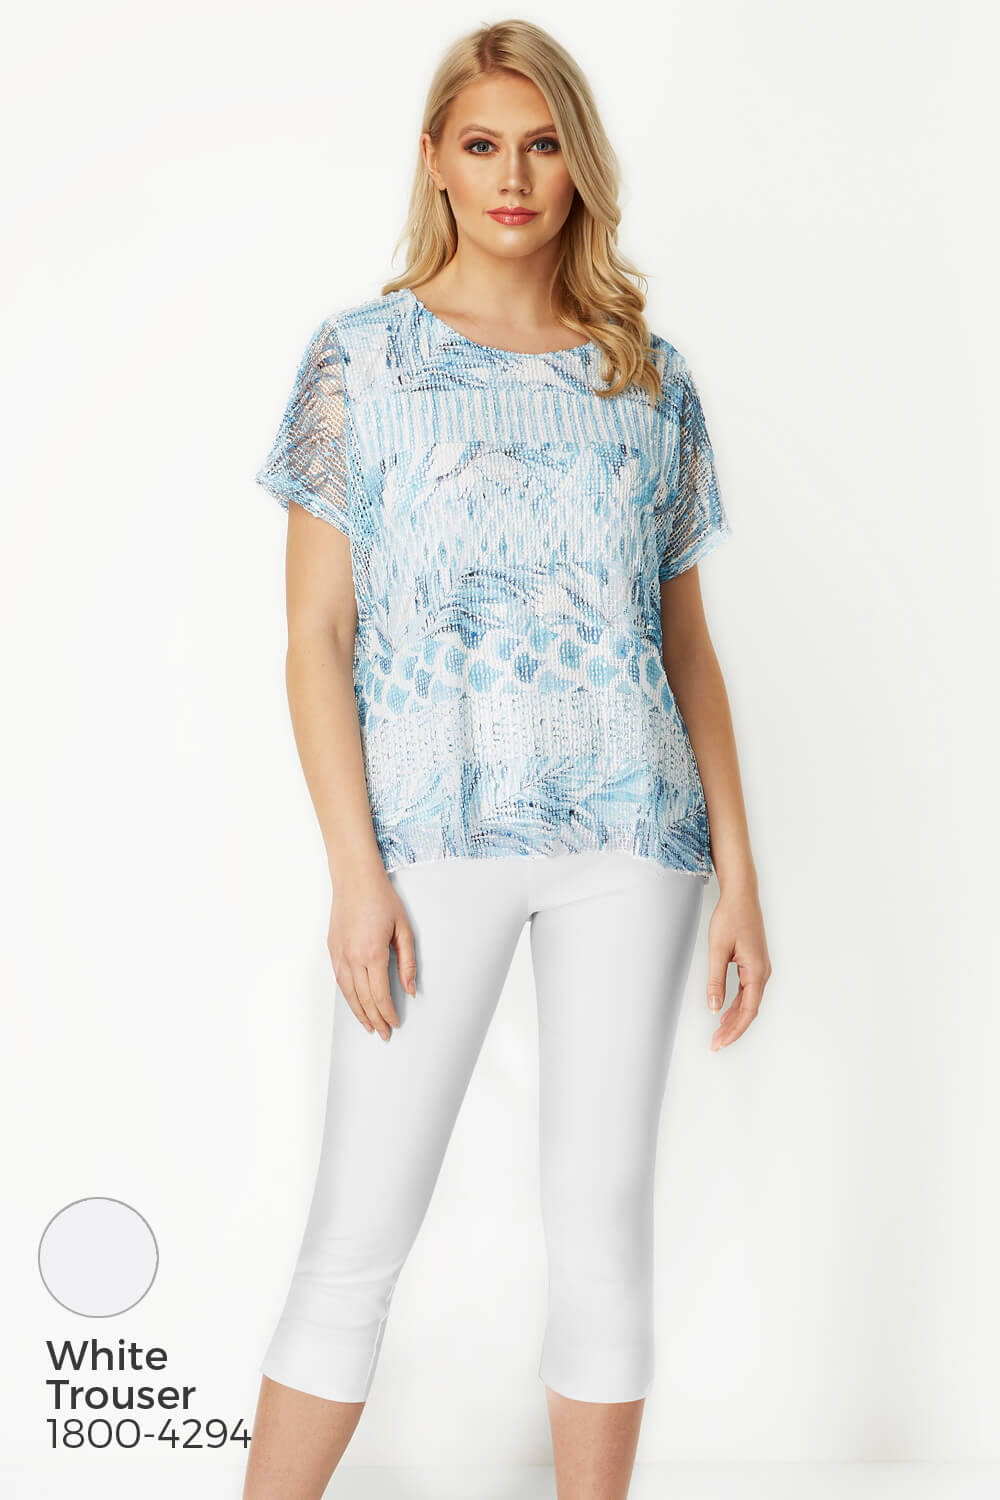 Blue Tropical Print Net Overlay Top, Image 5 of 8